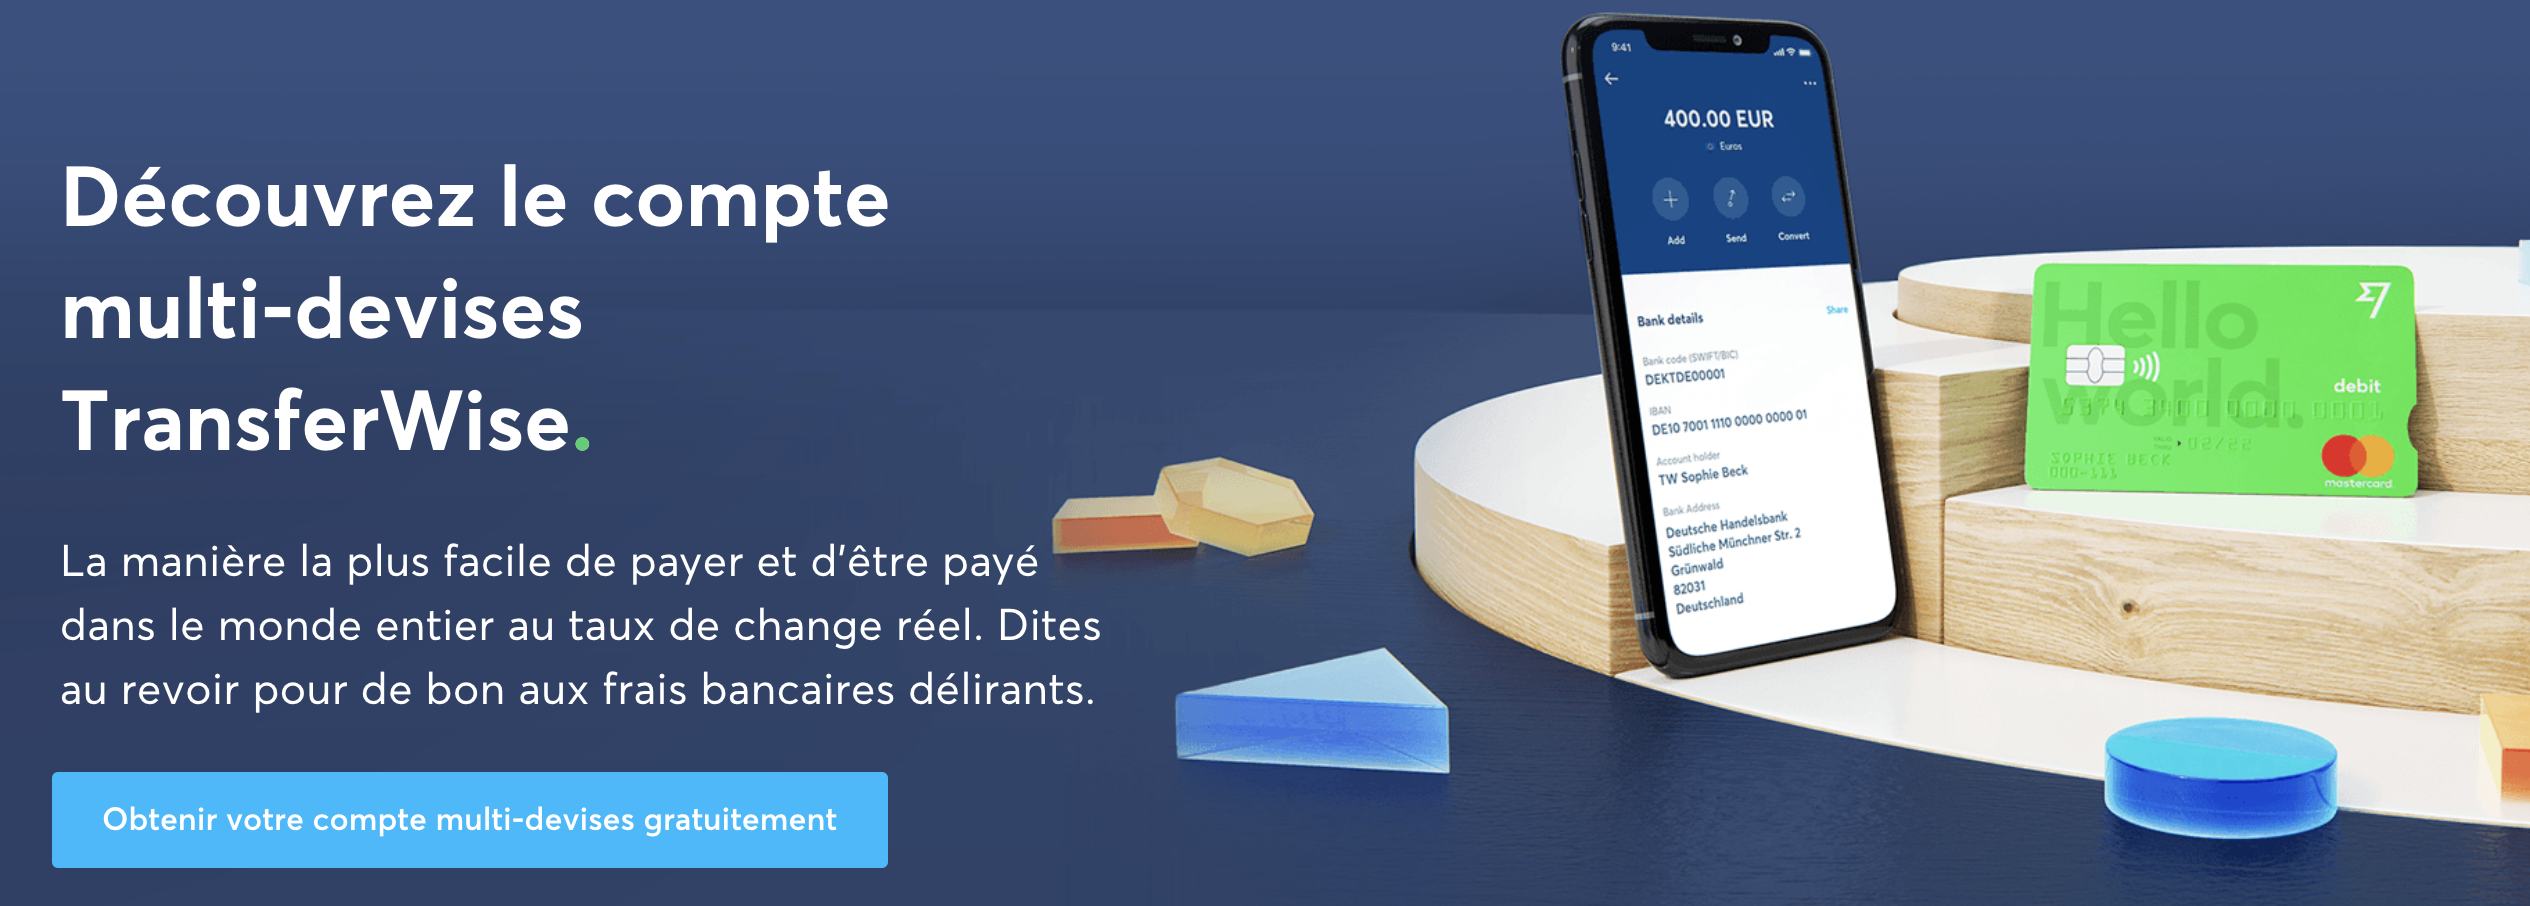 Transferwise compte multidevise - Wannawin